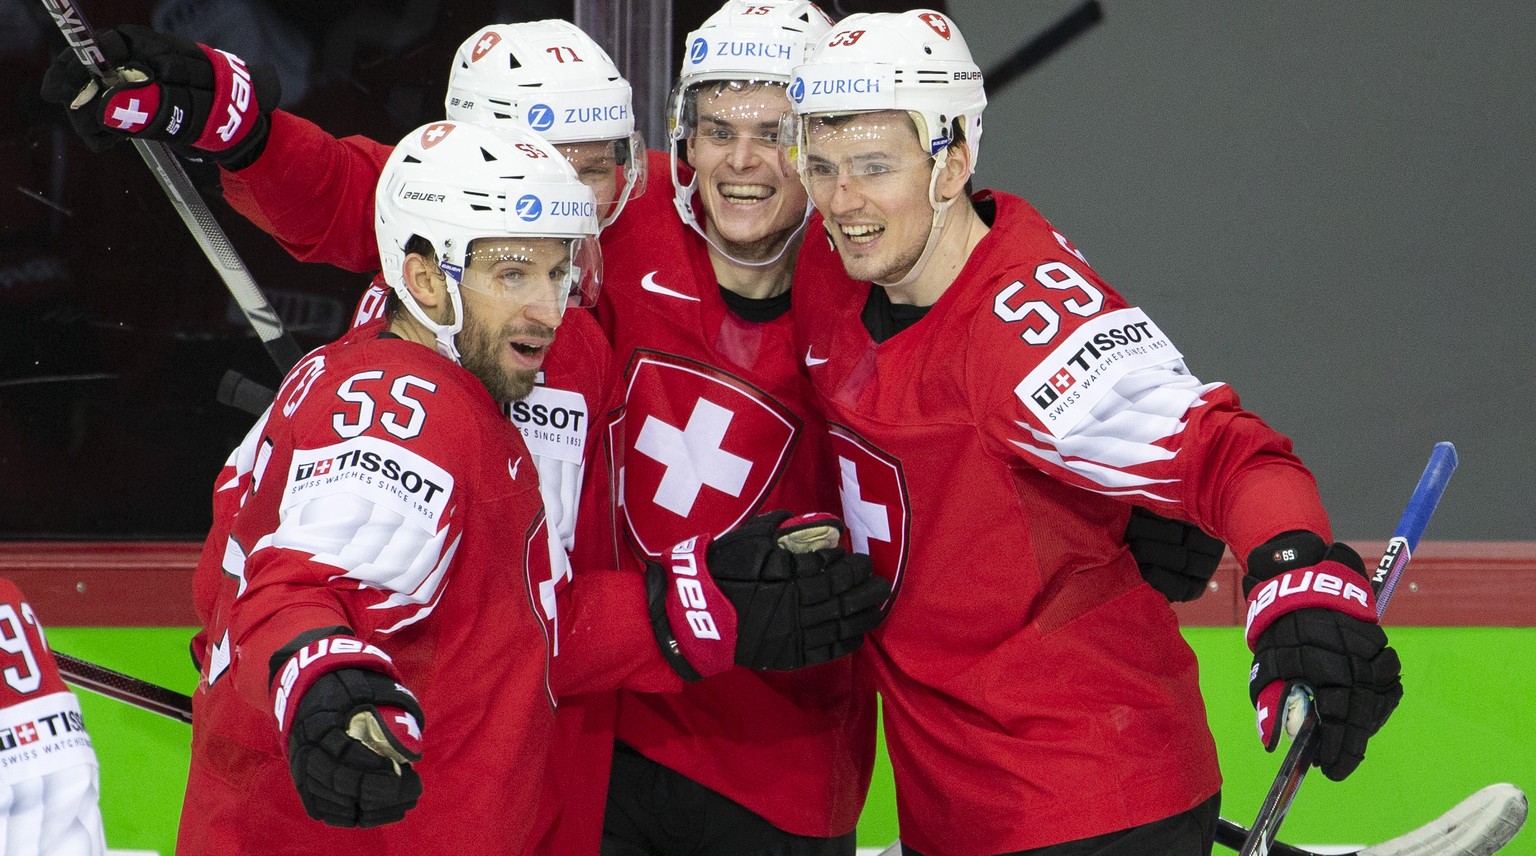 Switzerland&#039;s forward Gregory Hofmann, 2nd right, celebrates his goal with teammates defender Romain Loeffel #55, forward Enzo Corvi #71 and forward Dario Simion, right, after scoring the 4:0 dur ...